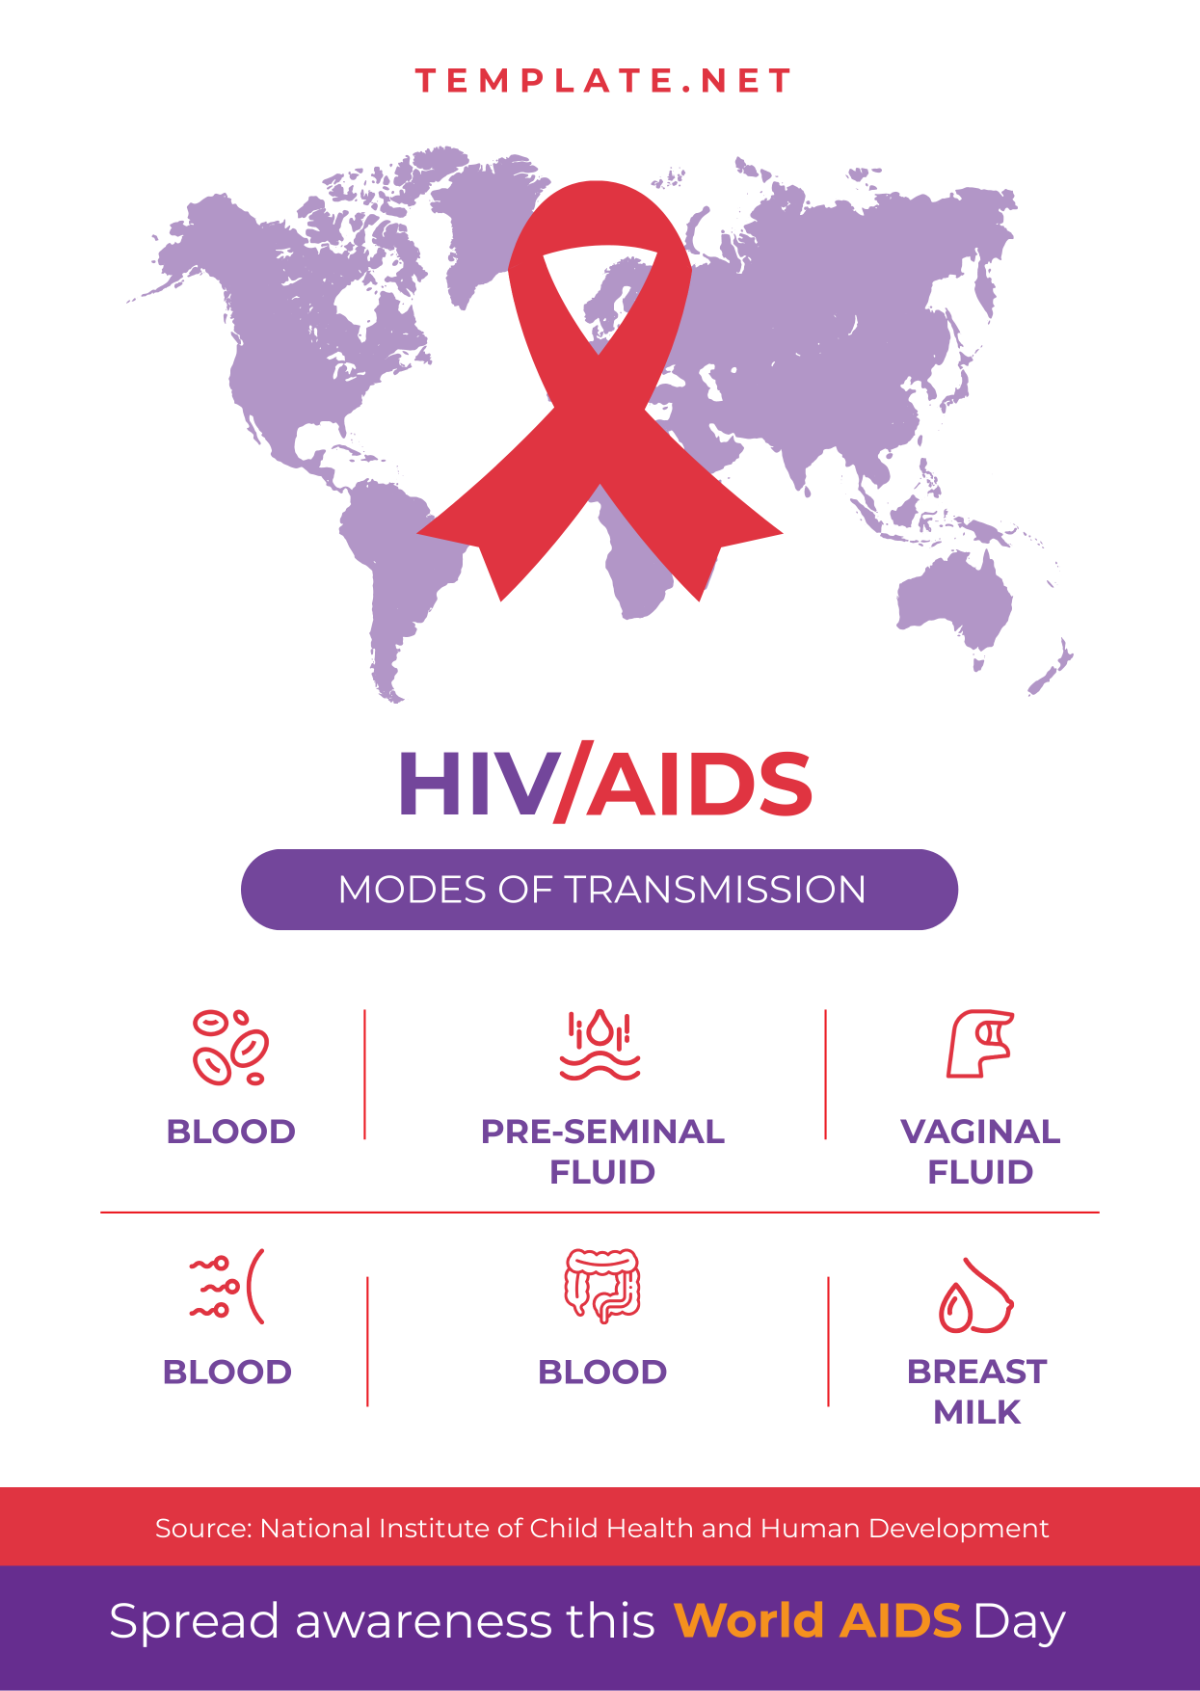 FREE World AIDS Day Template - Download in Word, Google Docs, PDF ...